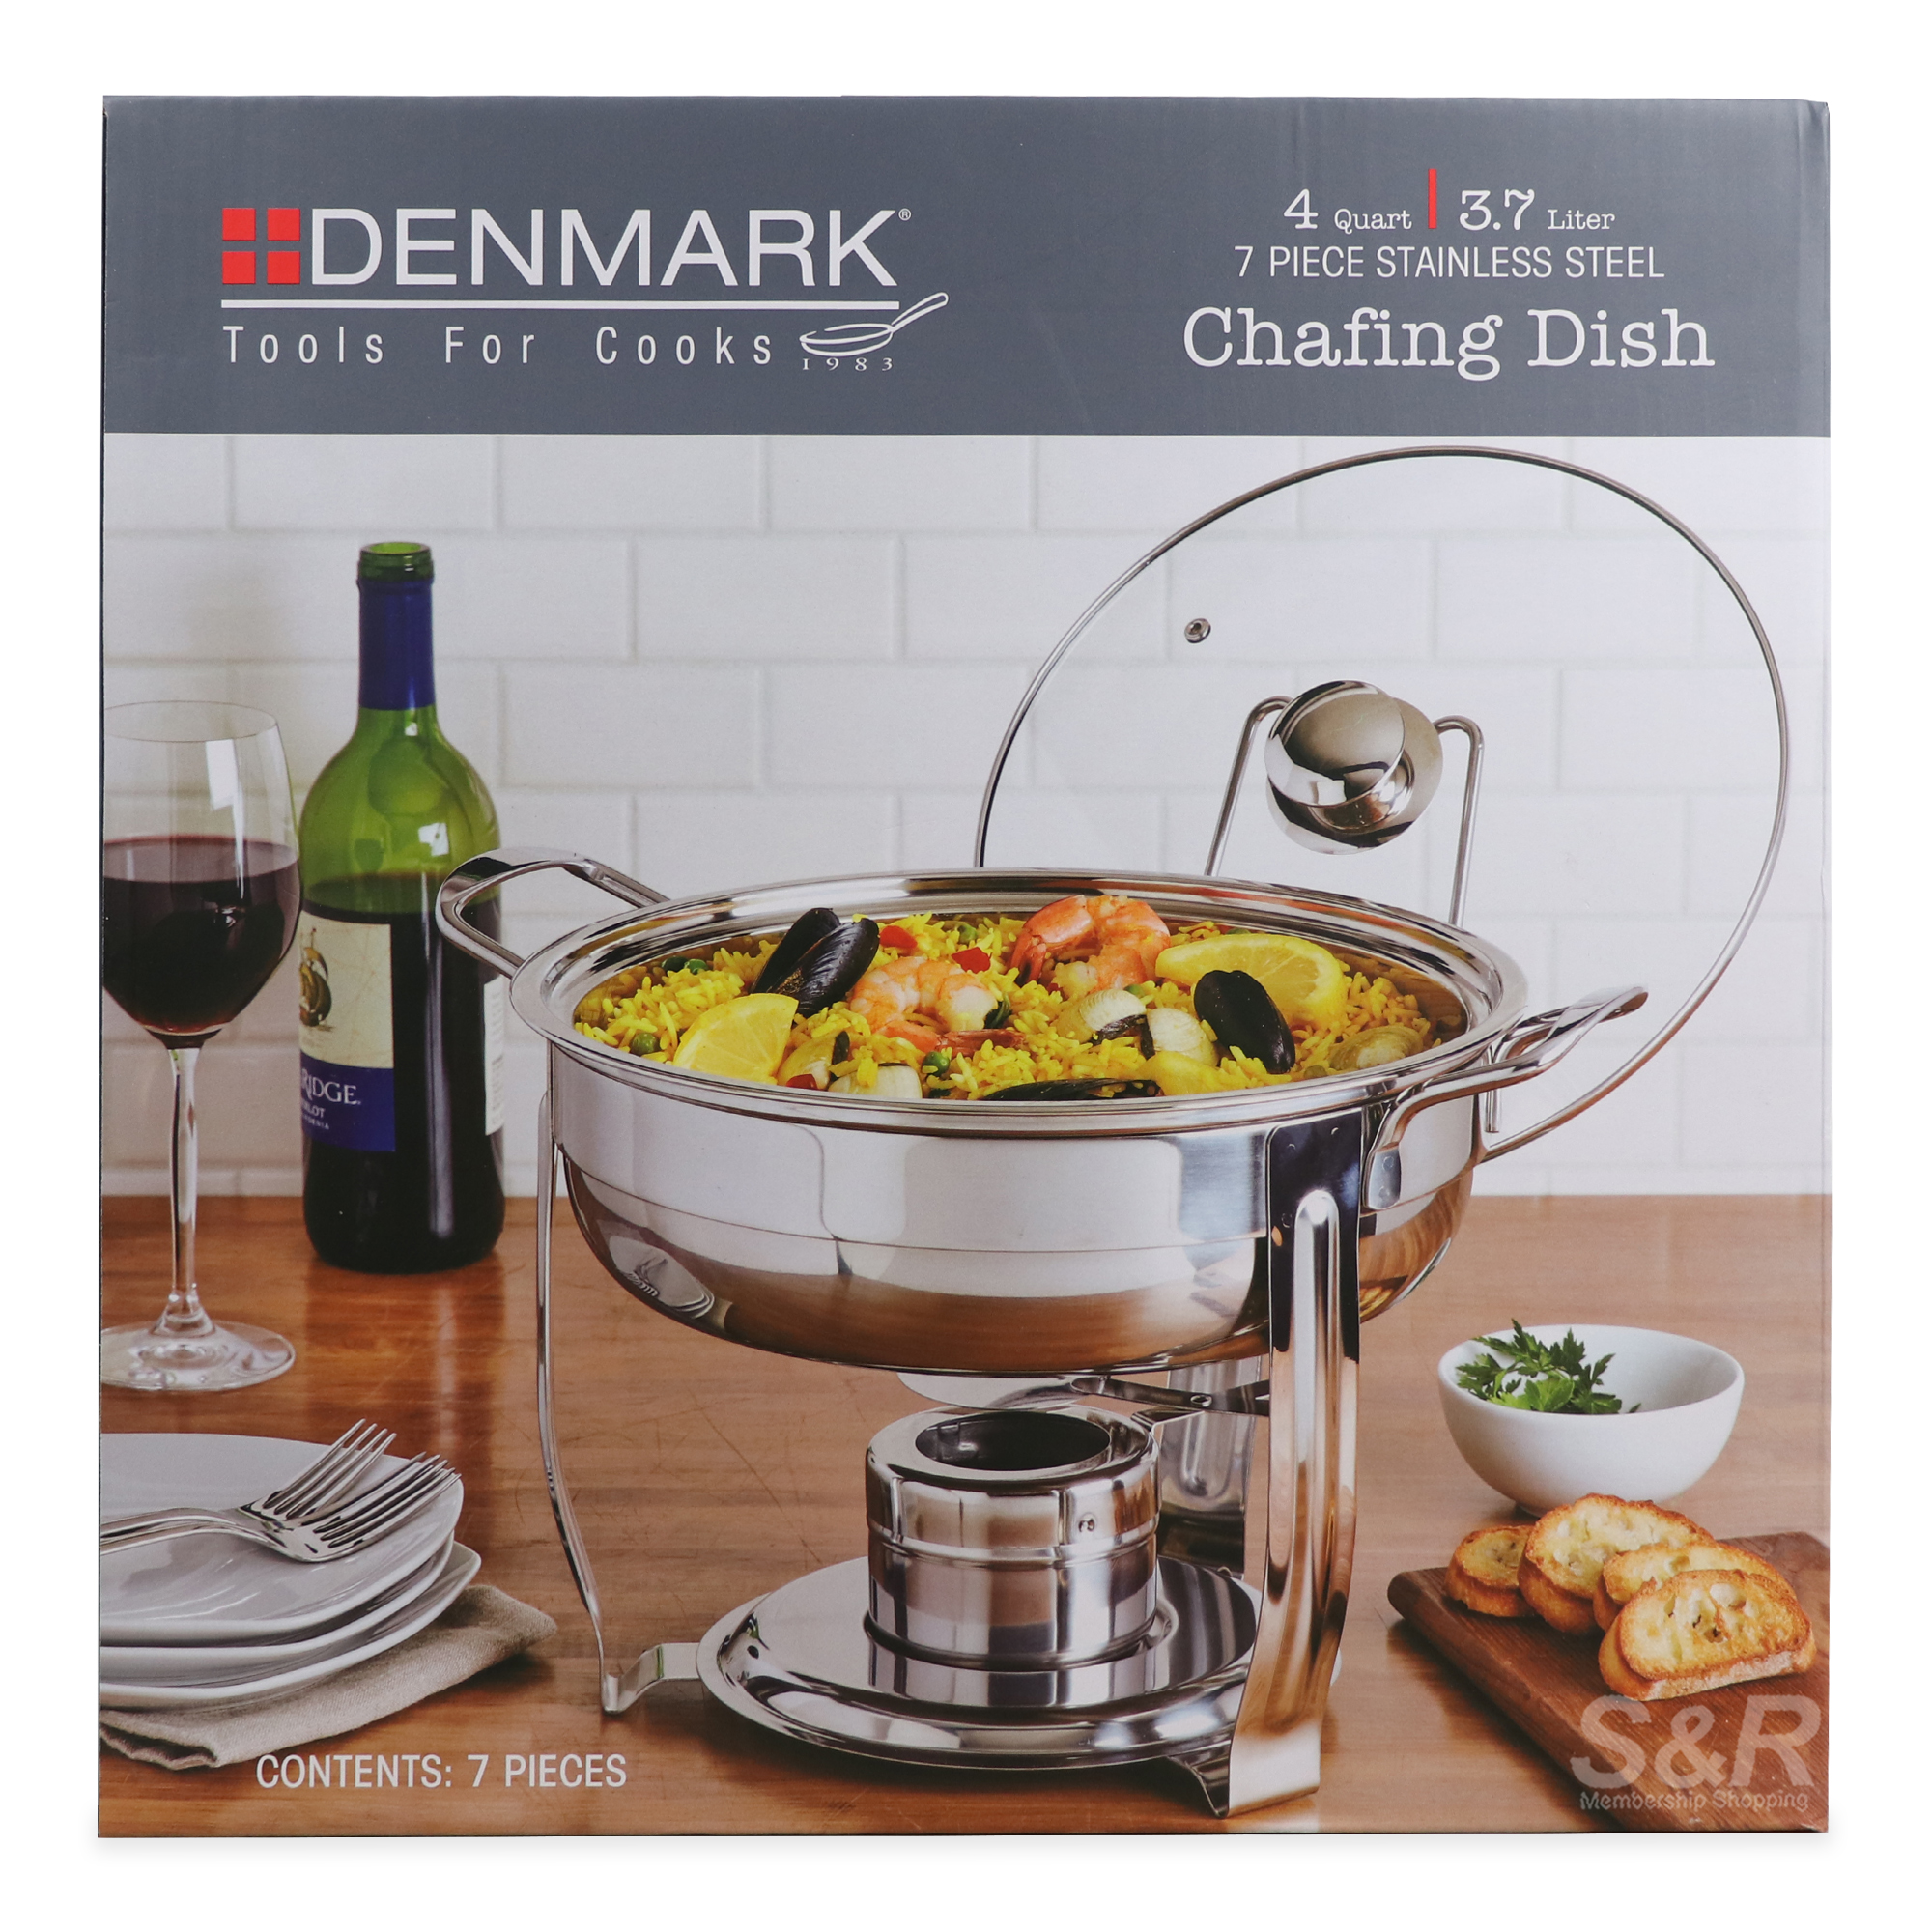 Denmark 7pc Stainless Steel Chafing Dish